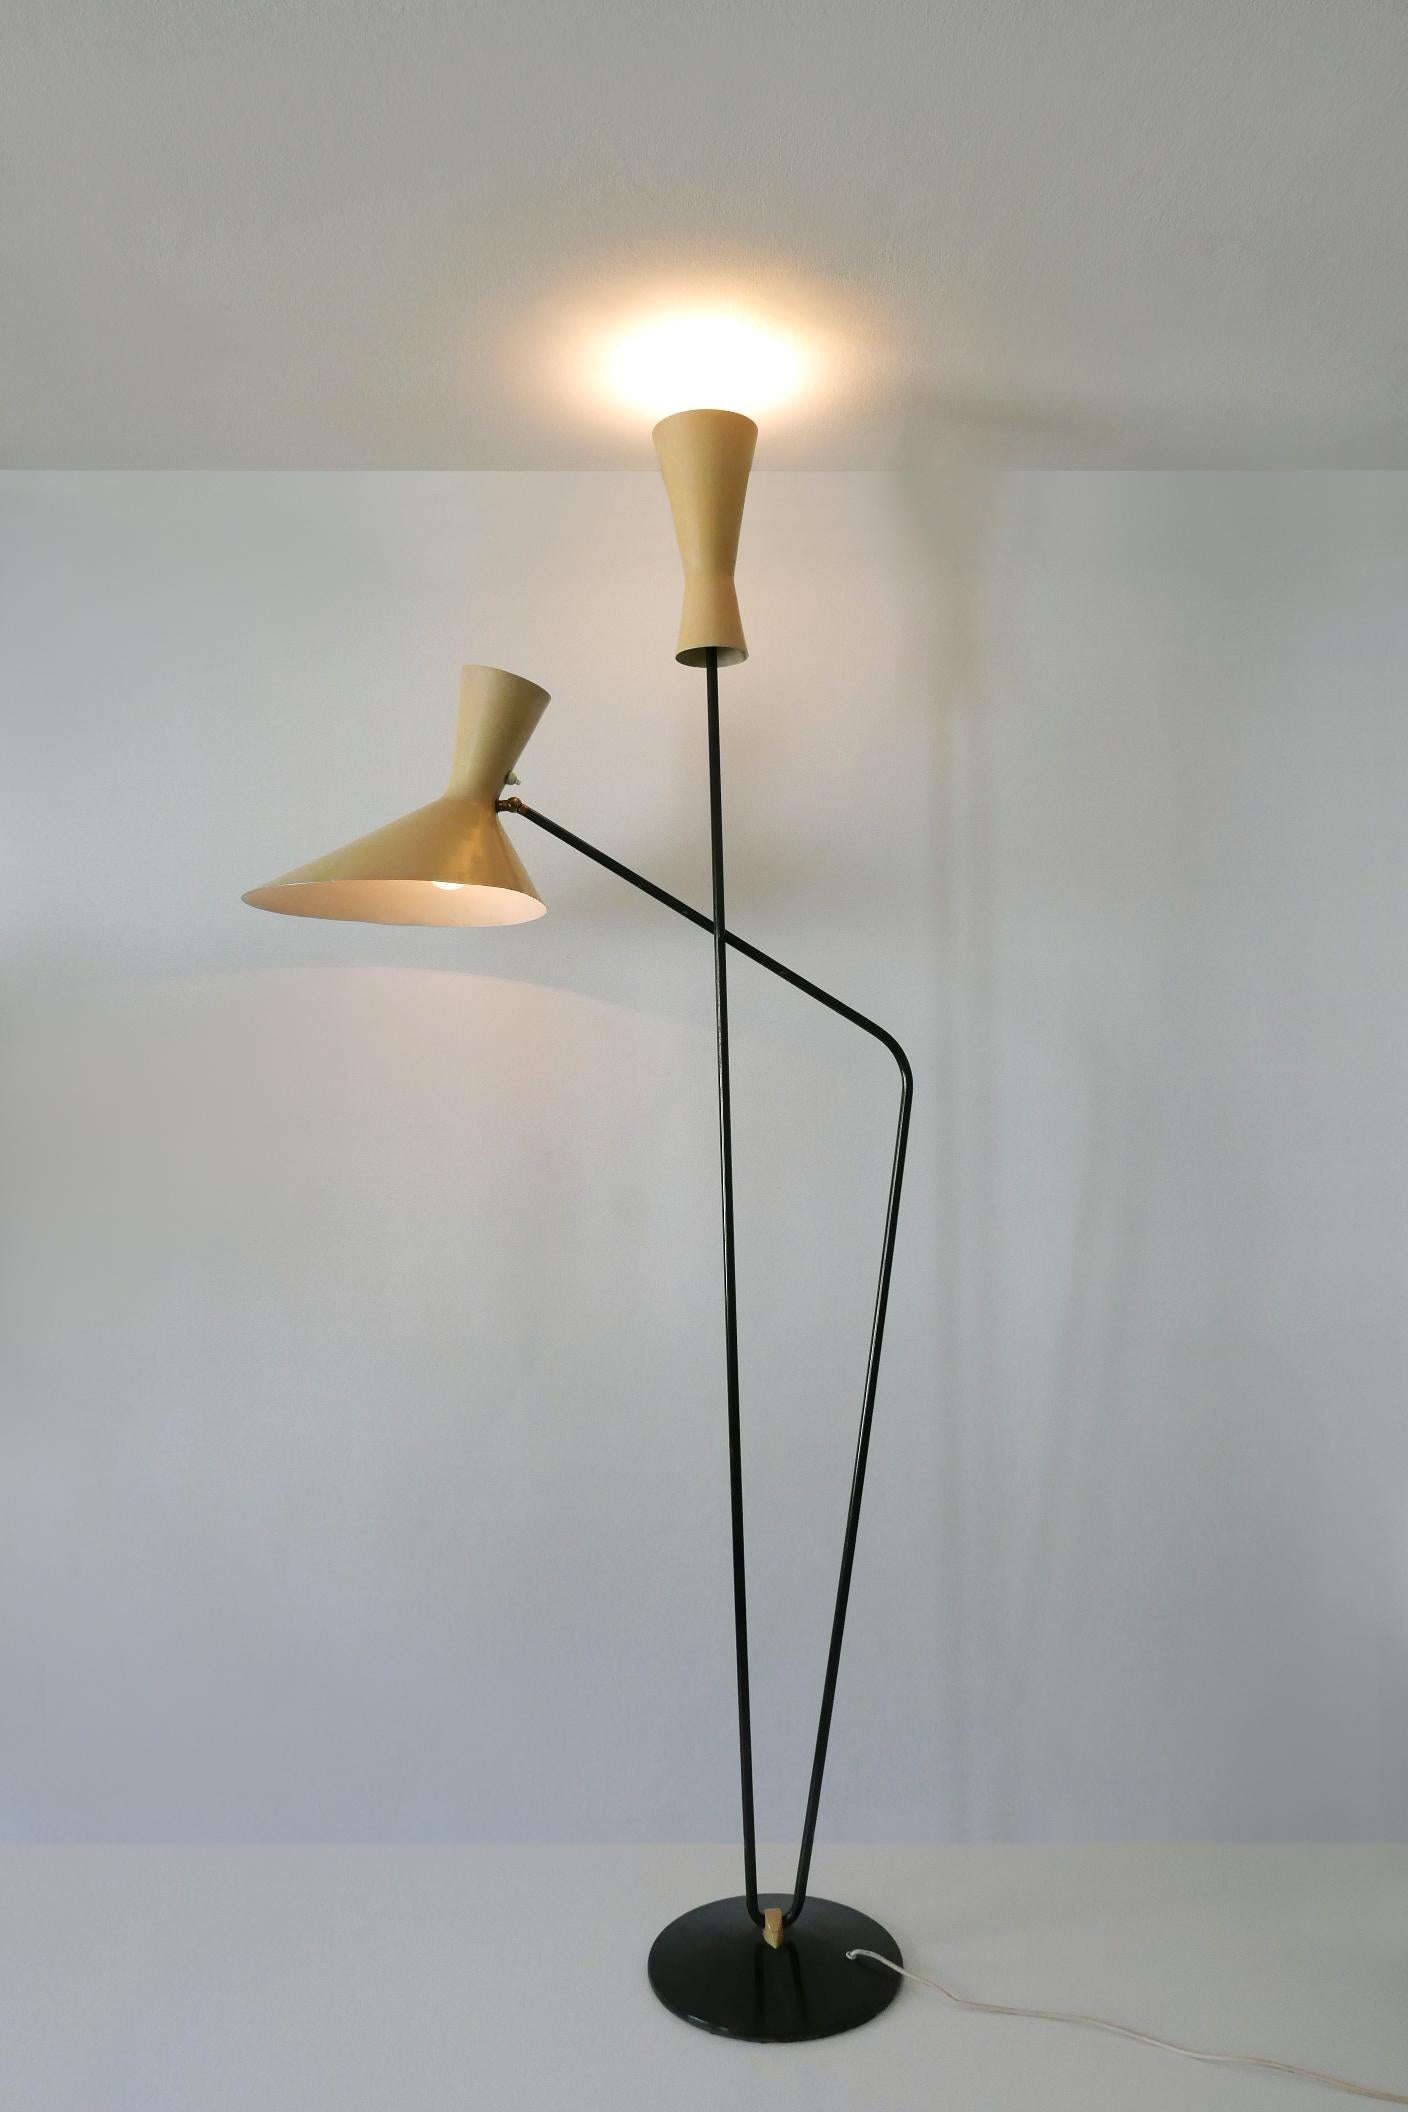 Rare Iconic Mid-Century Modern Floor Lamp by Prof. Carl Moor for BAG Turgi 1950s For Sale 1